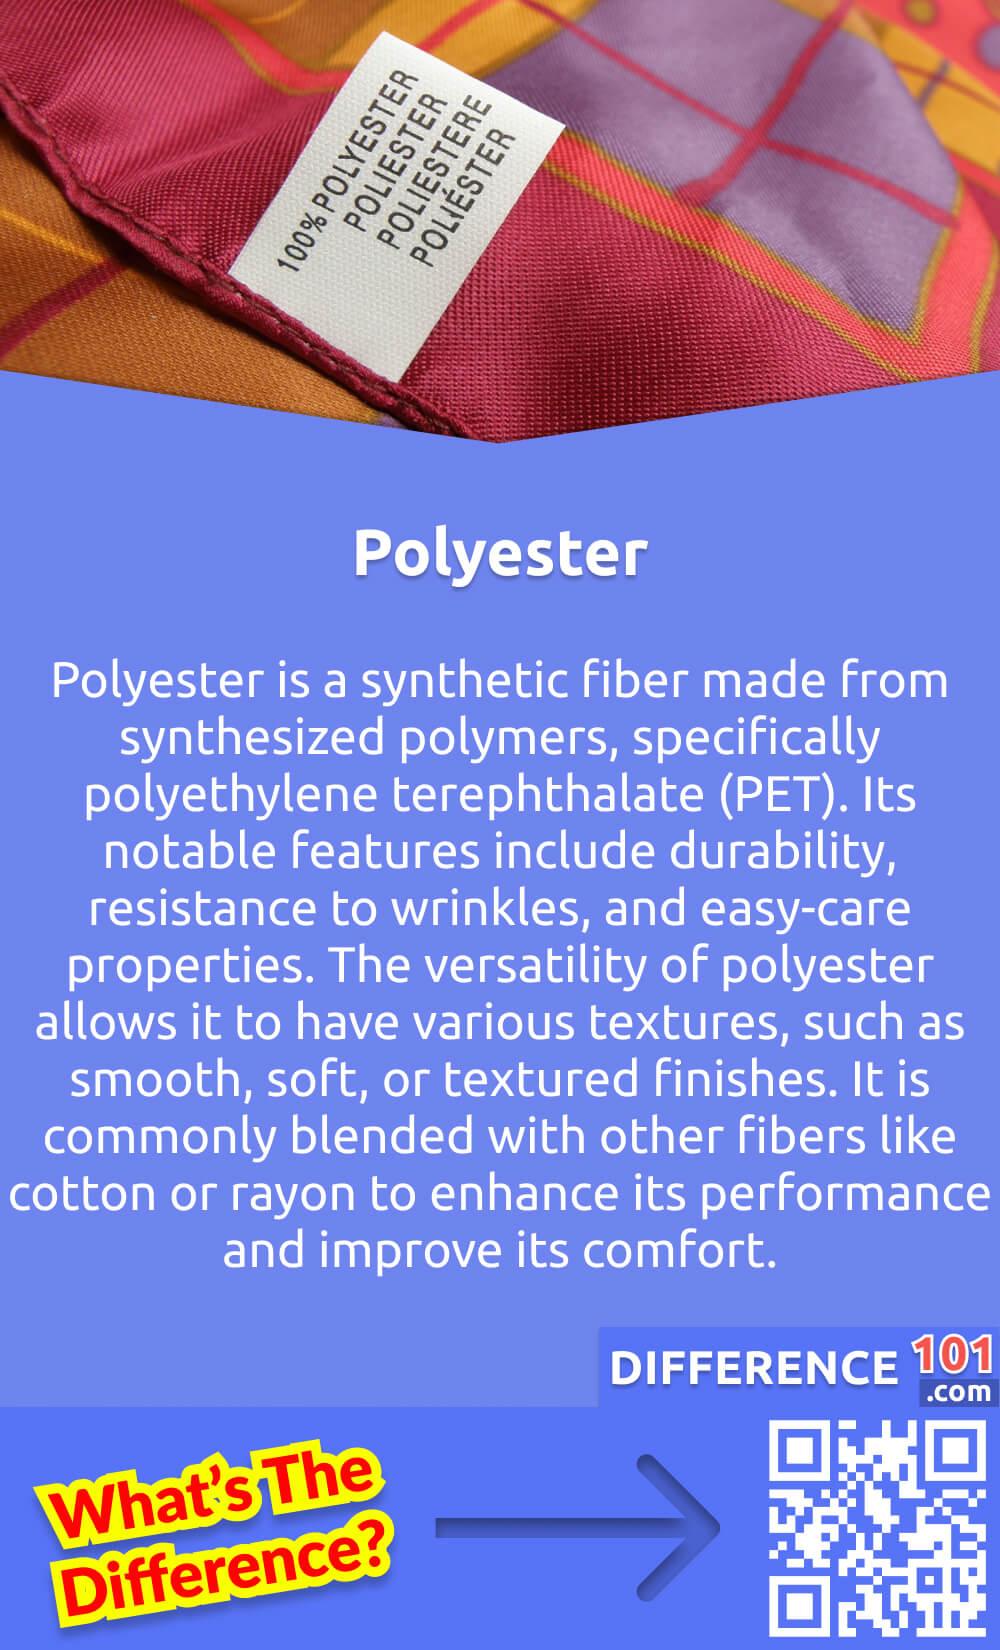 What Is Polyester? Polyester is a synthetic fiber made from synthesized polymers, specifically polyethylene terephthalate (PET). Its notable features include durability, resistance to wrinkles, and easy-care properties. The versatility of polyester allows it to have various textures, such as smooth, soft, or textured finishes. It is commonly blended with other fibers like cotton or rayon to enhance its performance and improve its comfort. Polyester fabrics are renowned for their strength and resistance to stretching, shrinking, and wrinkling, making them ideal for apparel, home textiles, upholstery, and industrial applications. Additionally, polyester is popular among sportswear and outdoor gear due to its ability to wick moisture away from the skin and provide insulation.